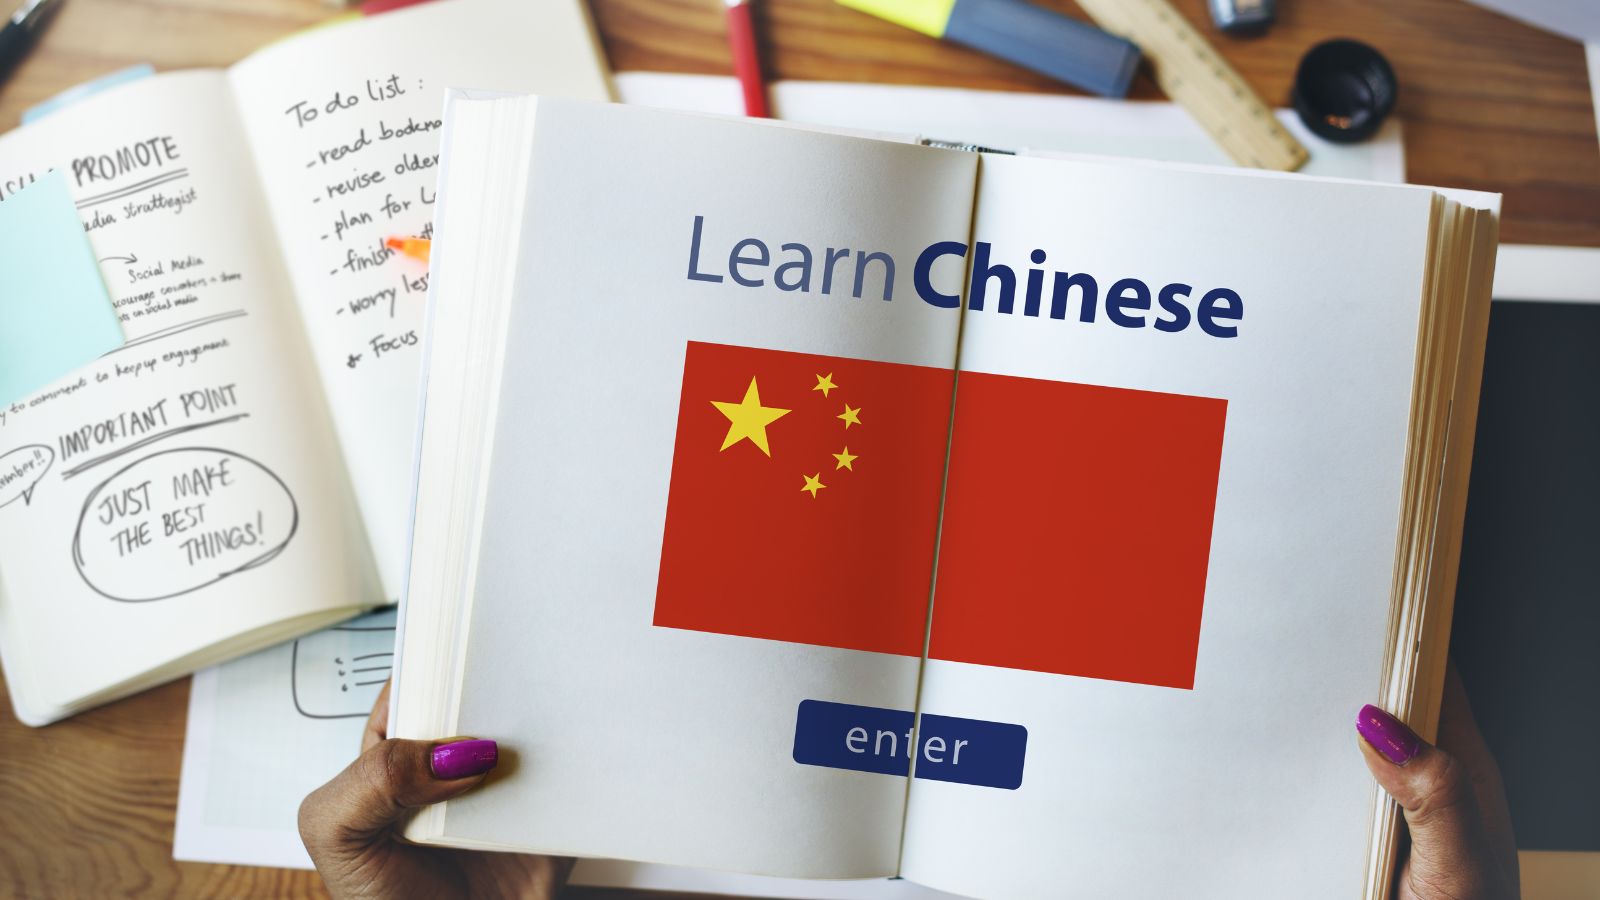 <p>The most prominent language spoken in China is Mandarin. While English is not as widely spoken in the tourist areas, some local folks do try and make the effort. It’s advantageous to learn a few common words in Mandarin, or you can carry a Chinese translation travel book or download a translation app when visiting the country.</p>